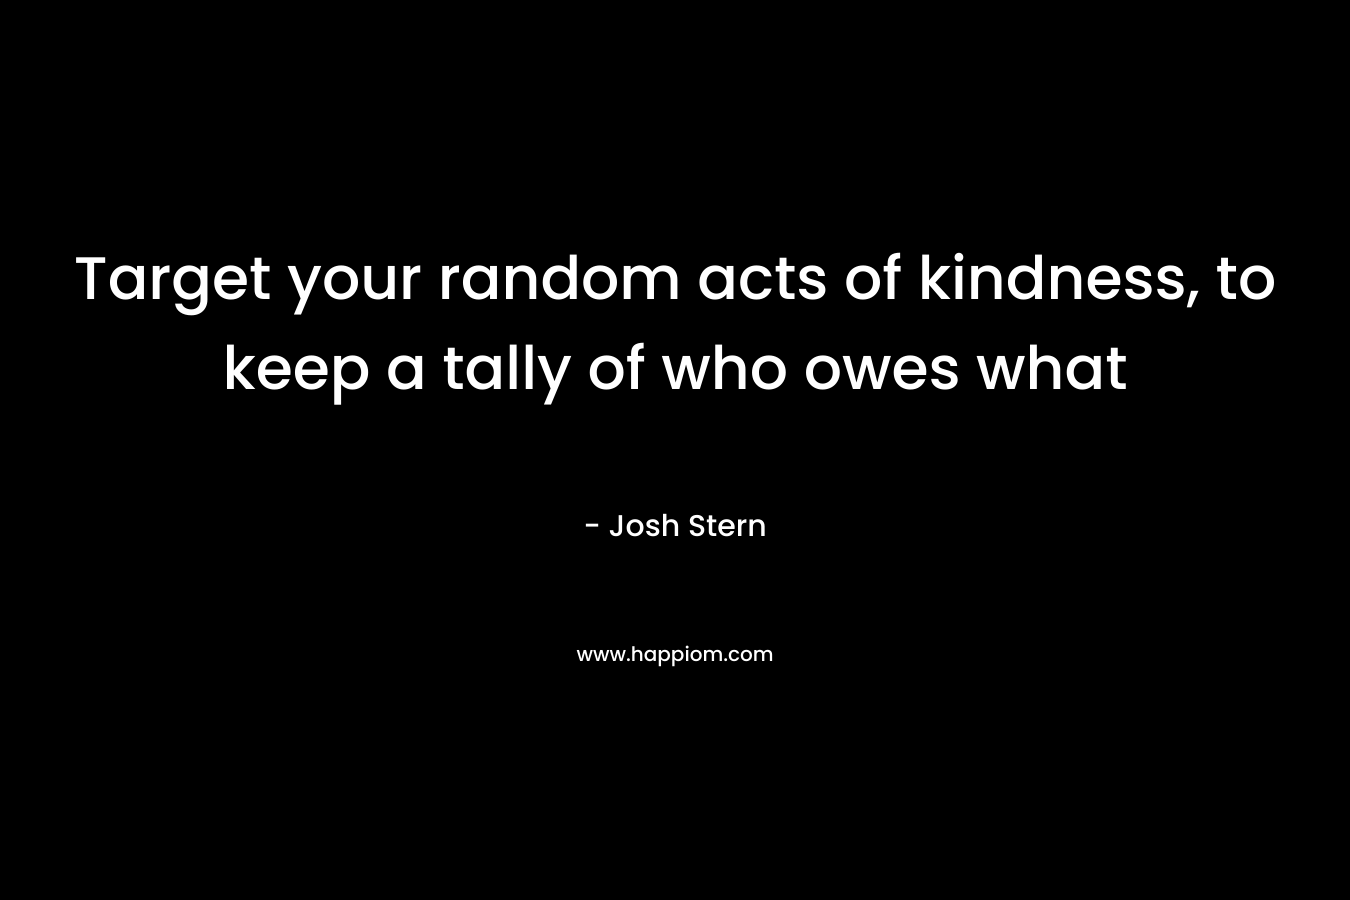 Target your random acts of kindness, to keep a tally of who owes what – Josh Stern